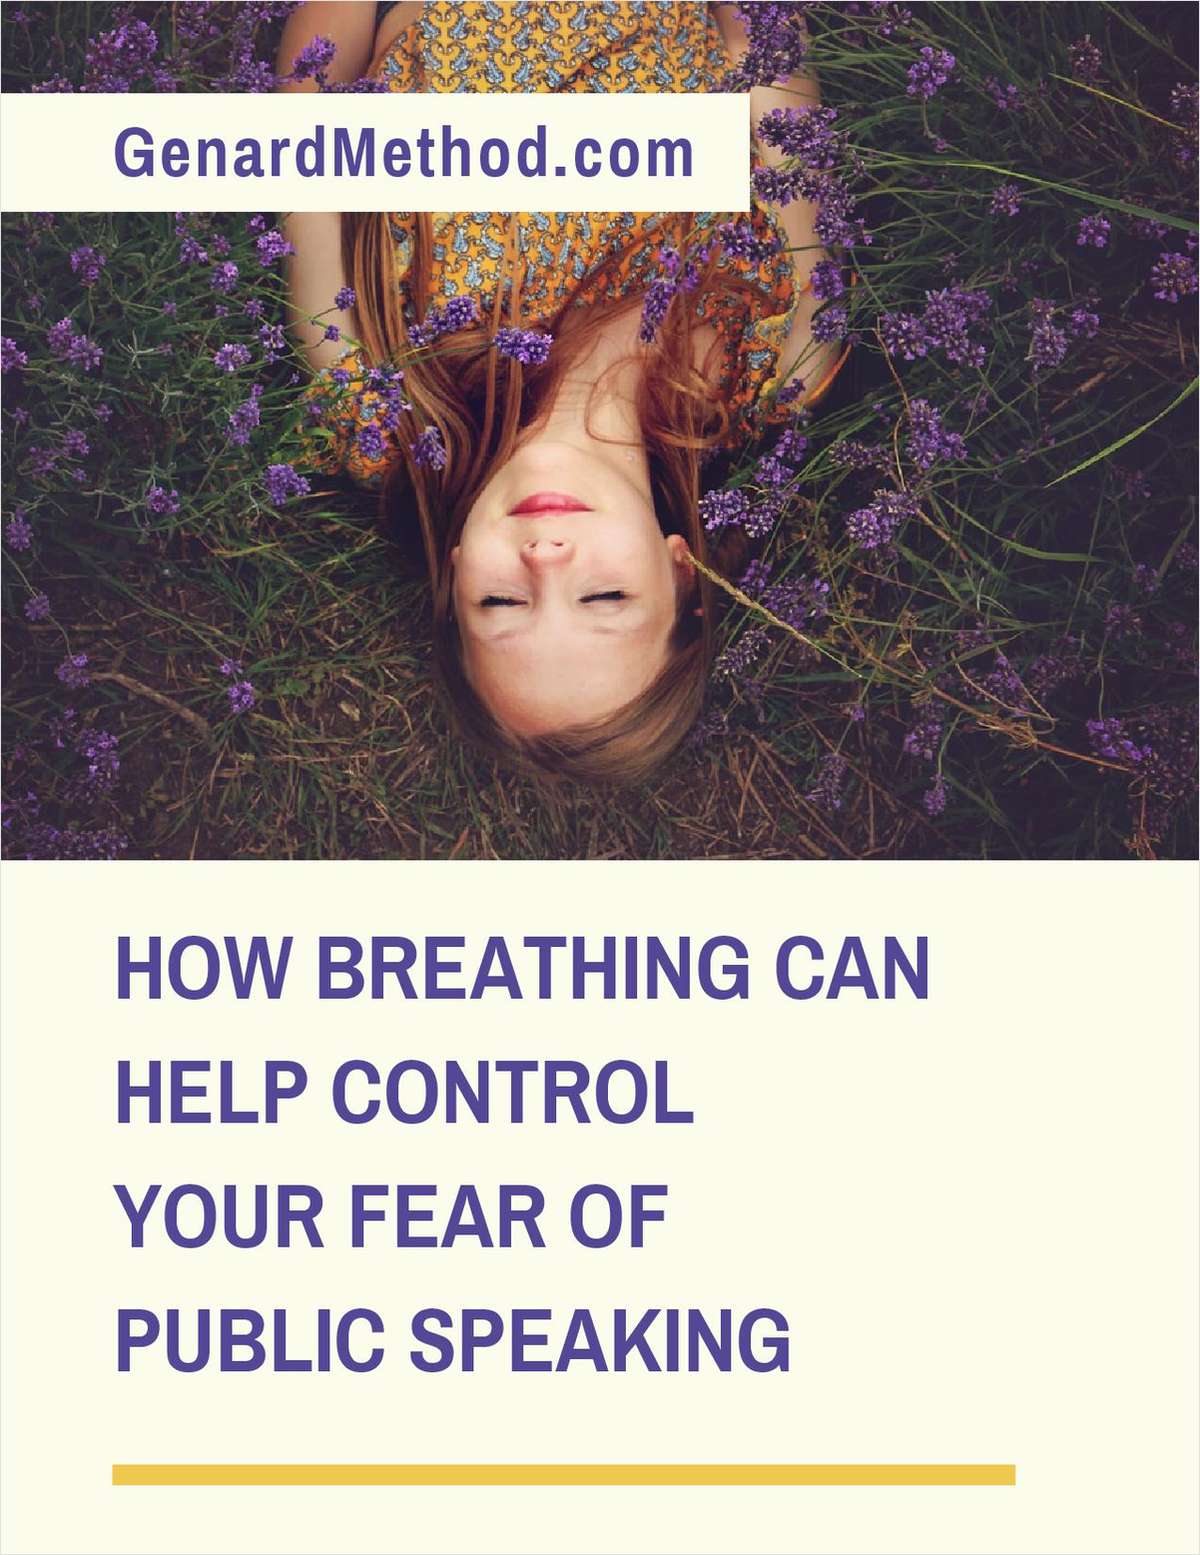 How Breathing Can Help Control Your Fear of Public Speaking